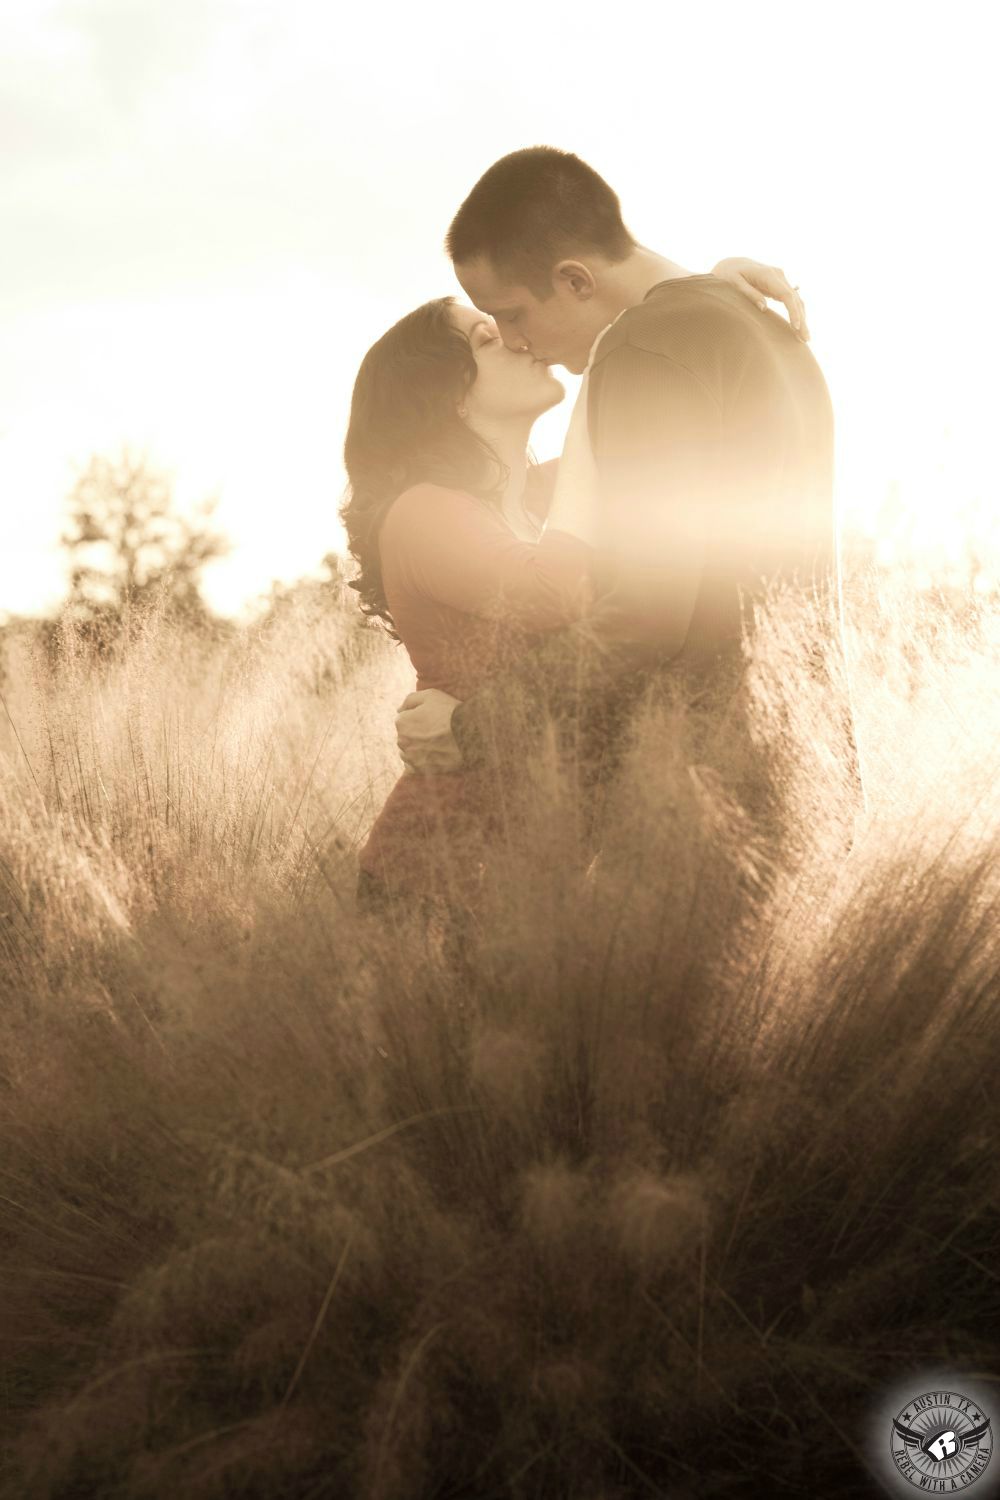 wavy haired brunette girl in a pink large weave sweater kisses a guy with dark short hair wearing a green long sleeve shirt while standing in fluffy sunlit brush with the sun warming the background in this Nicholas Sparks inspired engagement photograph in Austin.